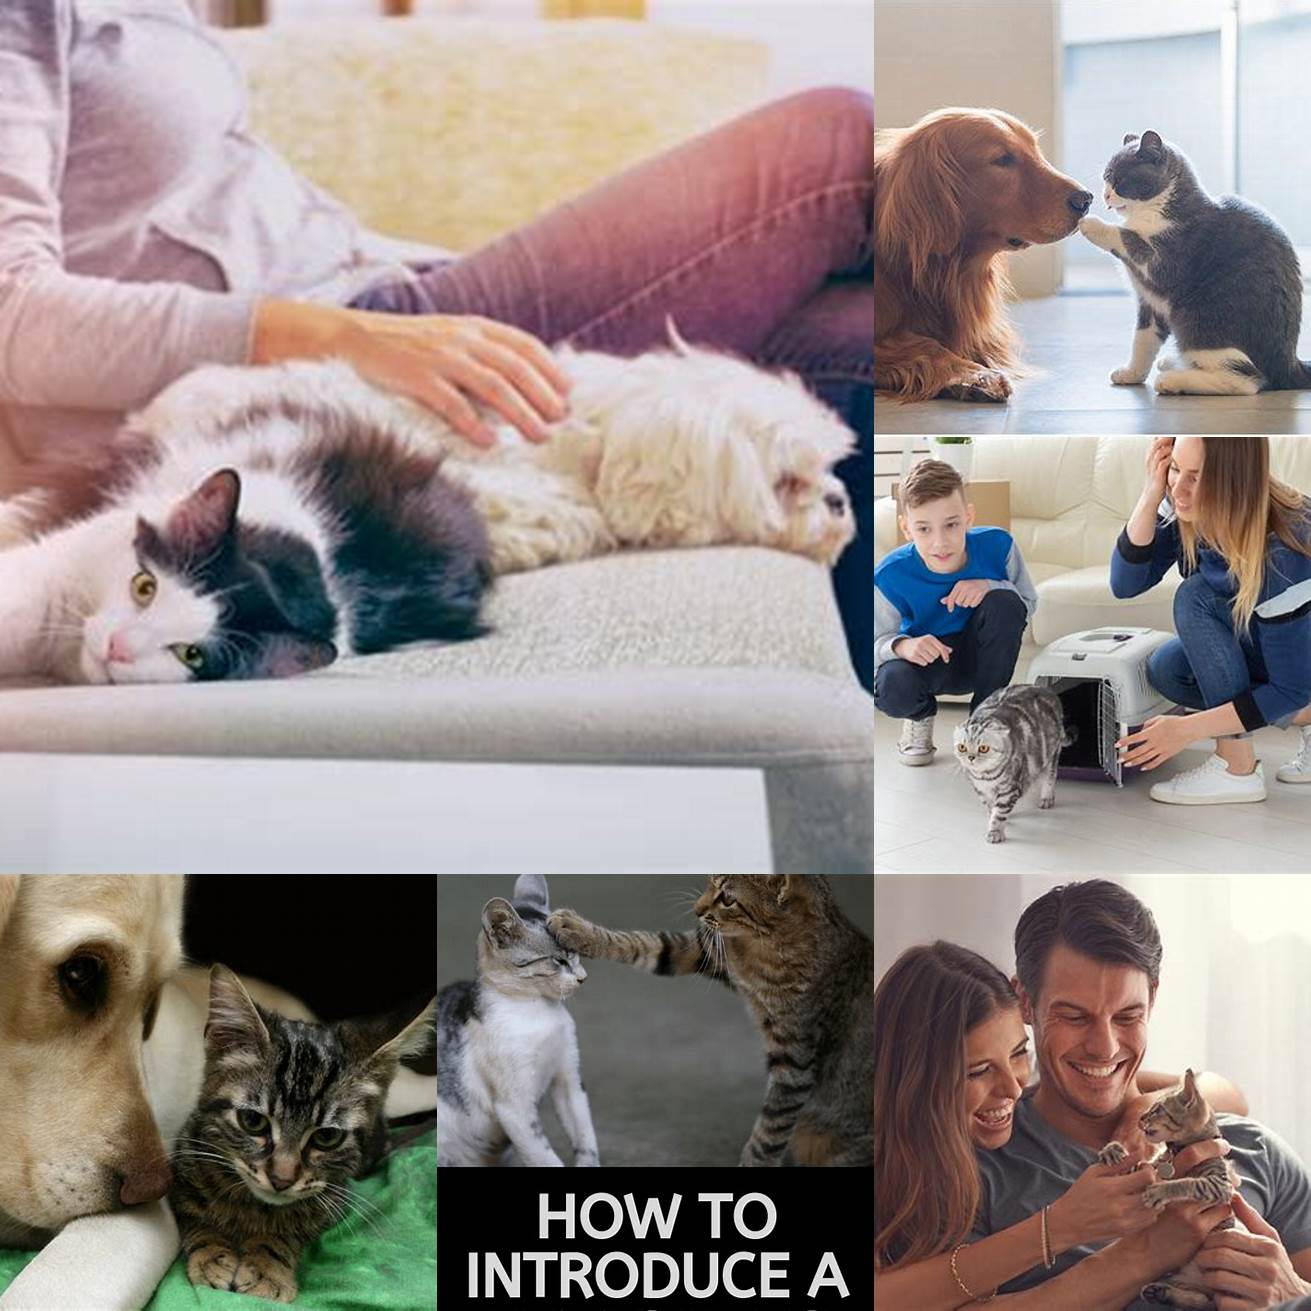 Be patient when introducing a new pet to your home